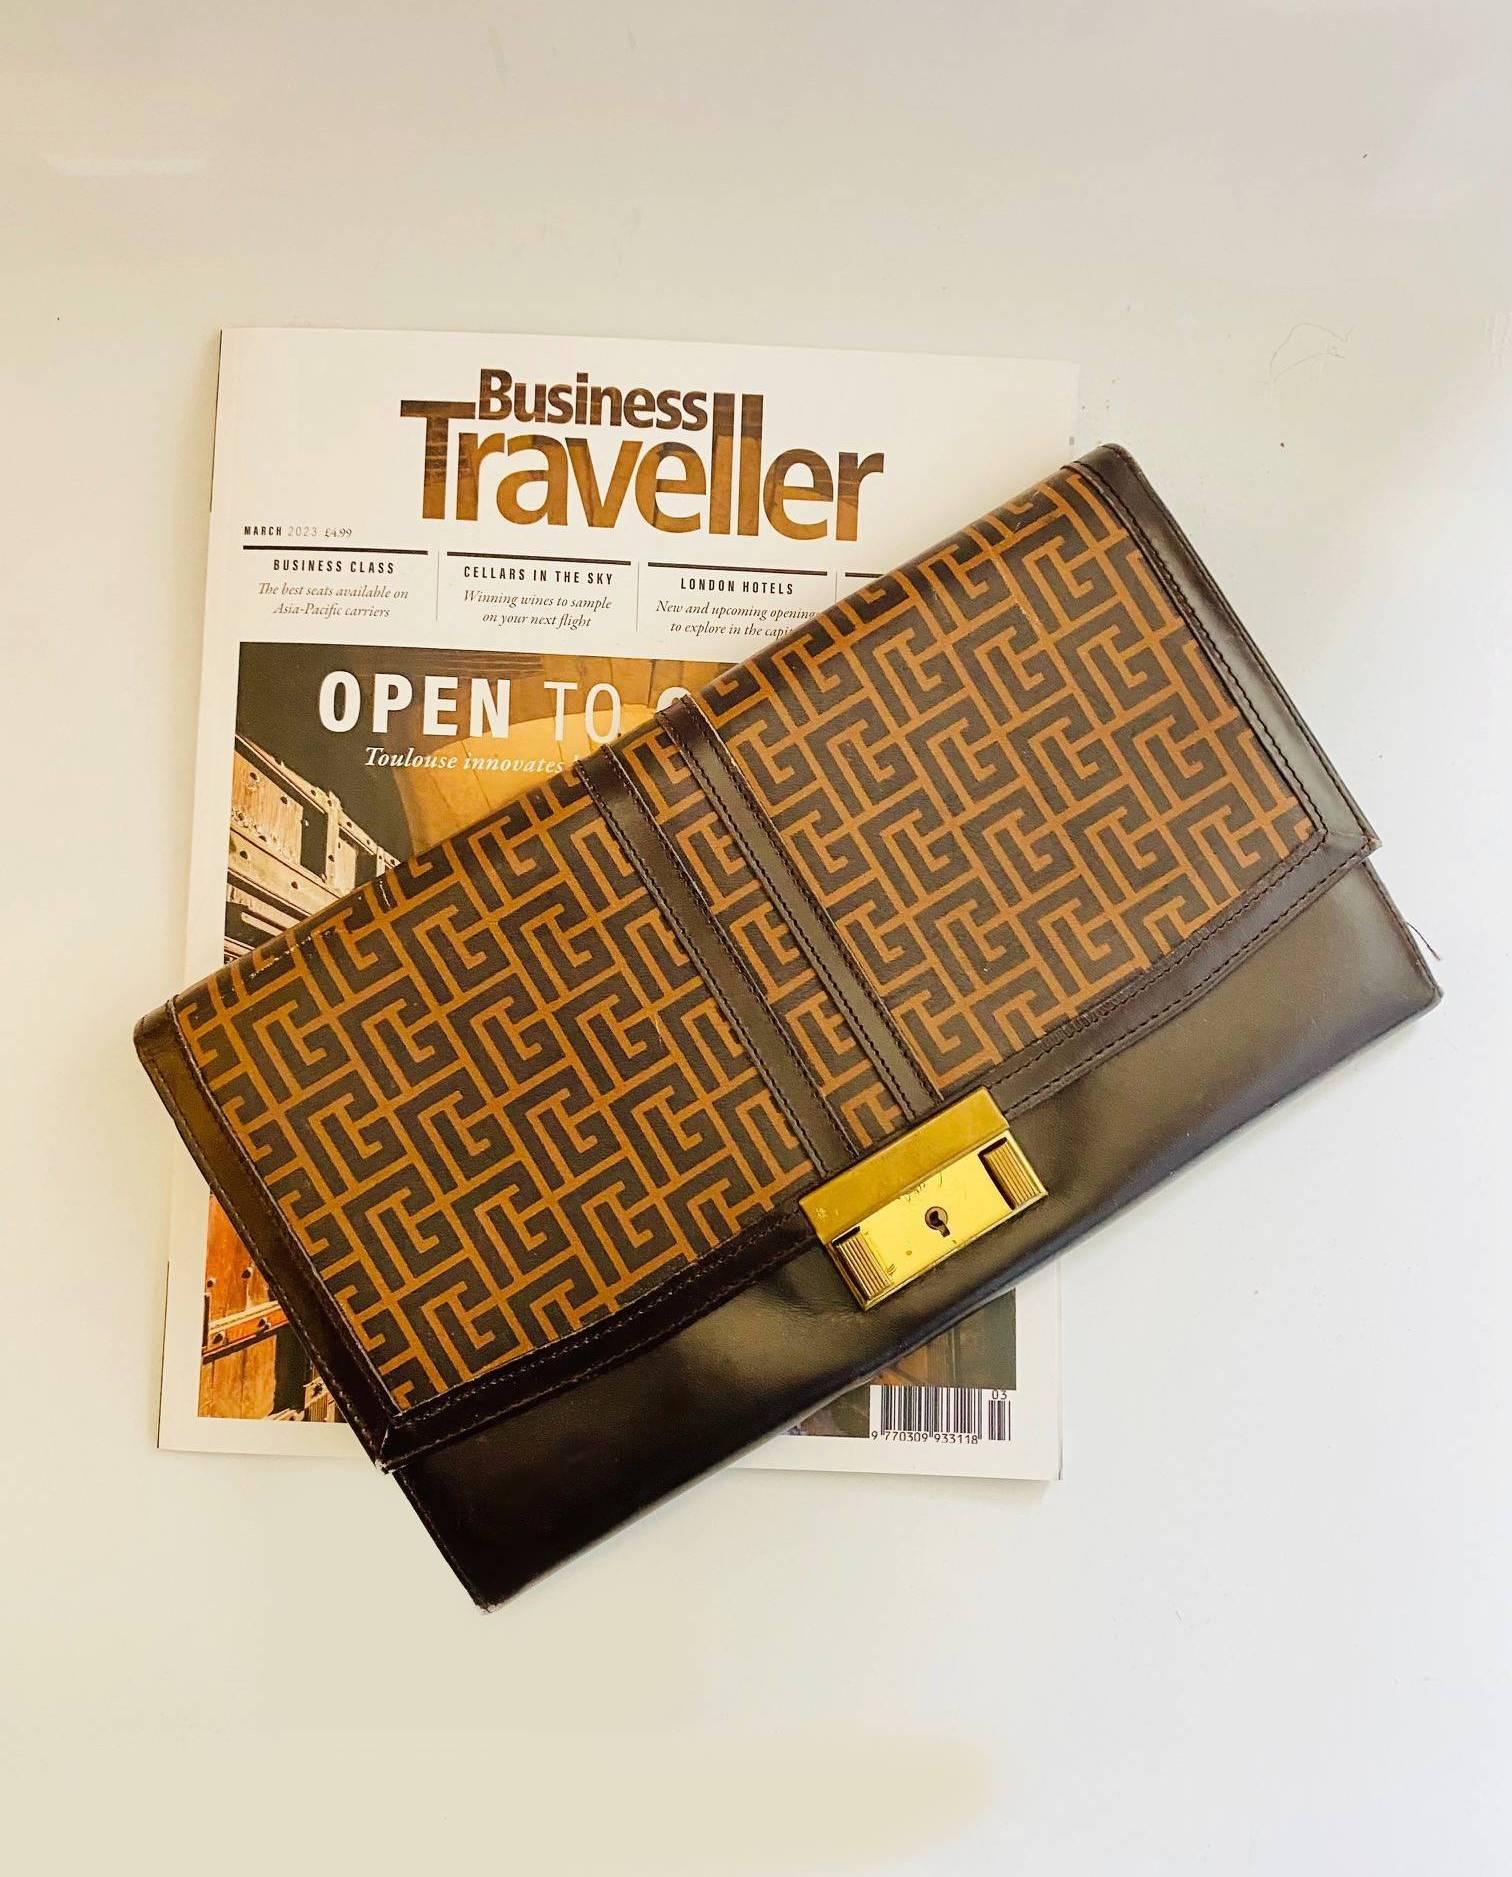 1970s PIERRE BALMAIN clutch bag/travel portfolio/clutch bag with pockets for travel documents and tickets, front clutch closure in gold tone metalware, geometric print on brown leather, this functional accessory supplements any wardrobe with a hint